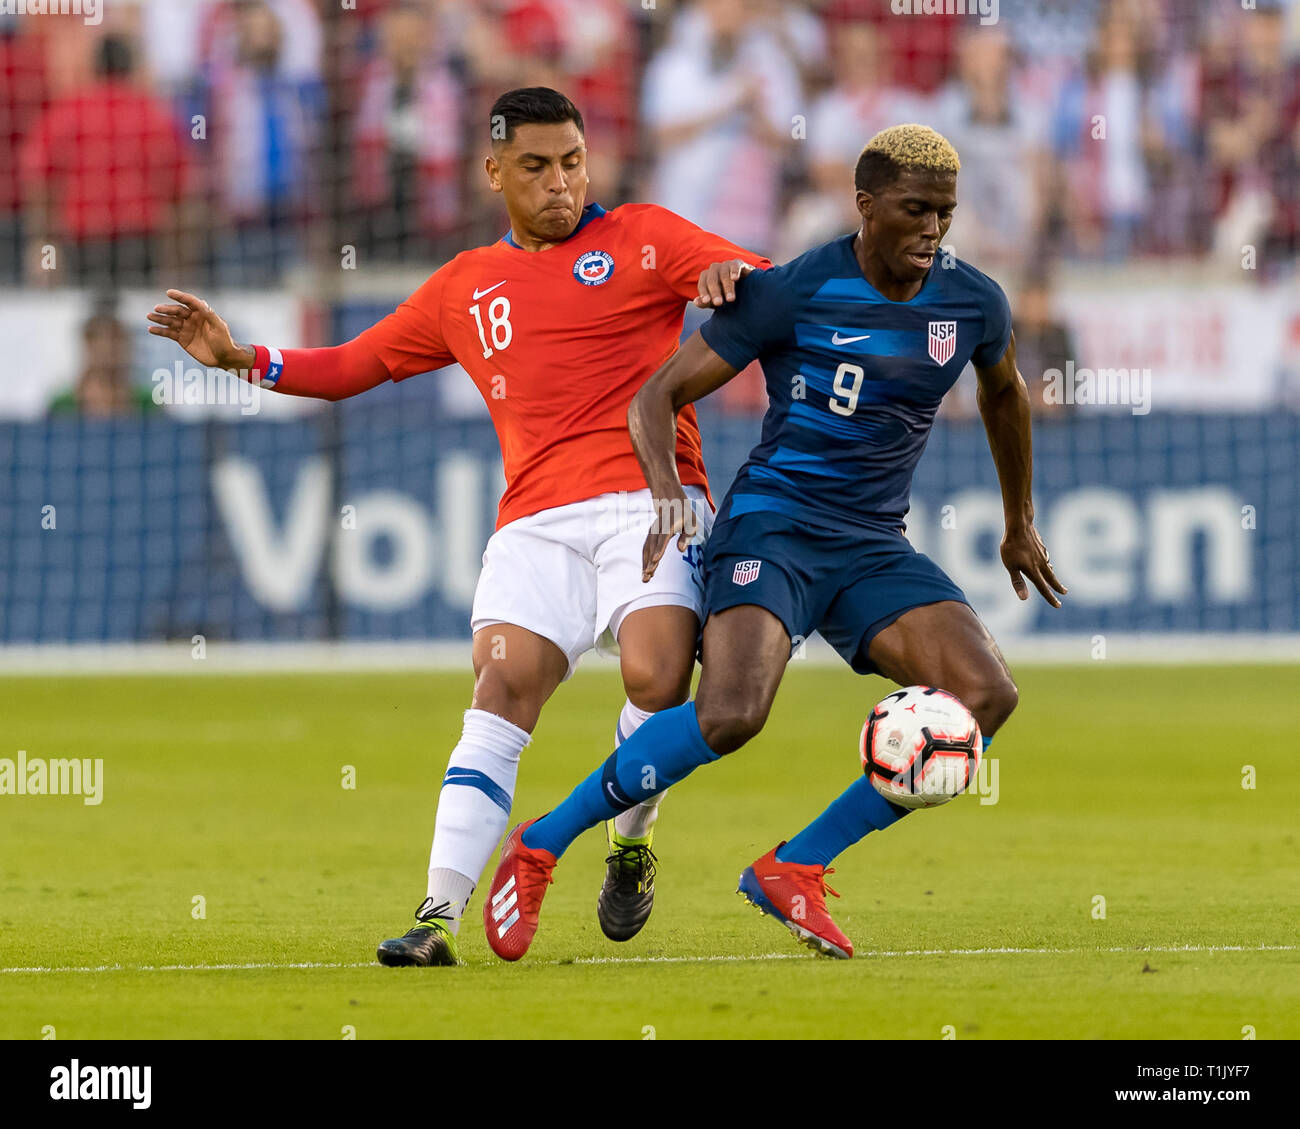 Houston, Texas, USA. 26th Mar 2019. USA forward Gyasi Zardes (9) and Chile defender Gonzalo Jara (18) battles for the ball during the second half of the international friendly match between USA and Chile at BBVA Compass Stadium in Houston, Texas The final ends in a tie 1-1 © Maria Lysaker/CSM. Credit: Cal Sport Media/Alamy Live News Stock Photo